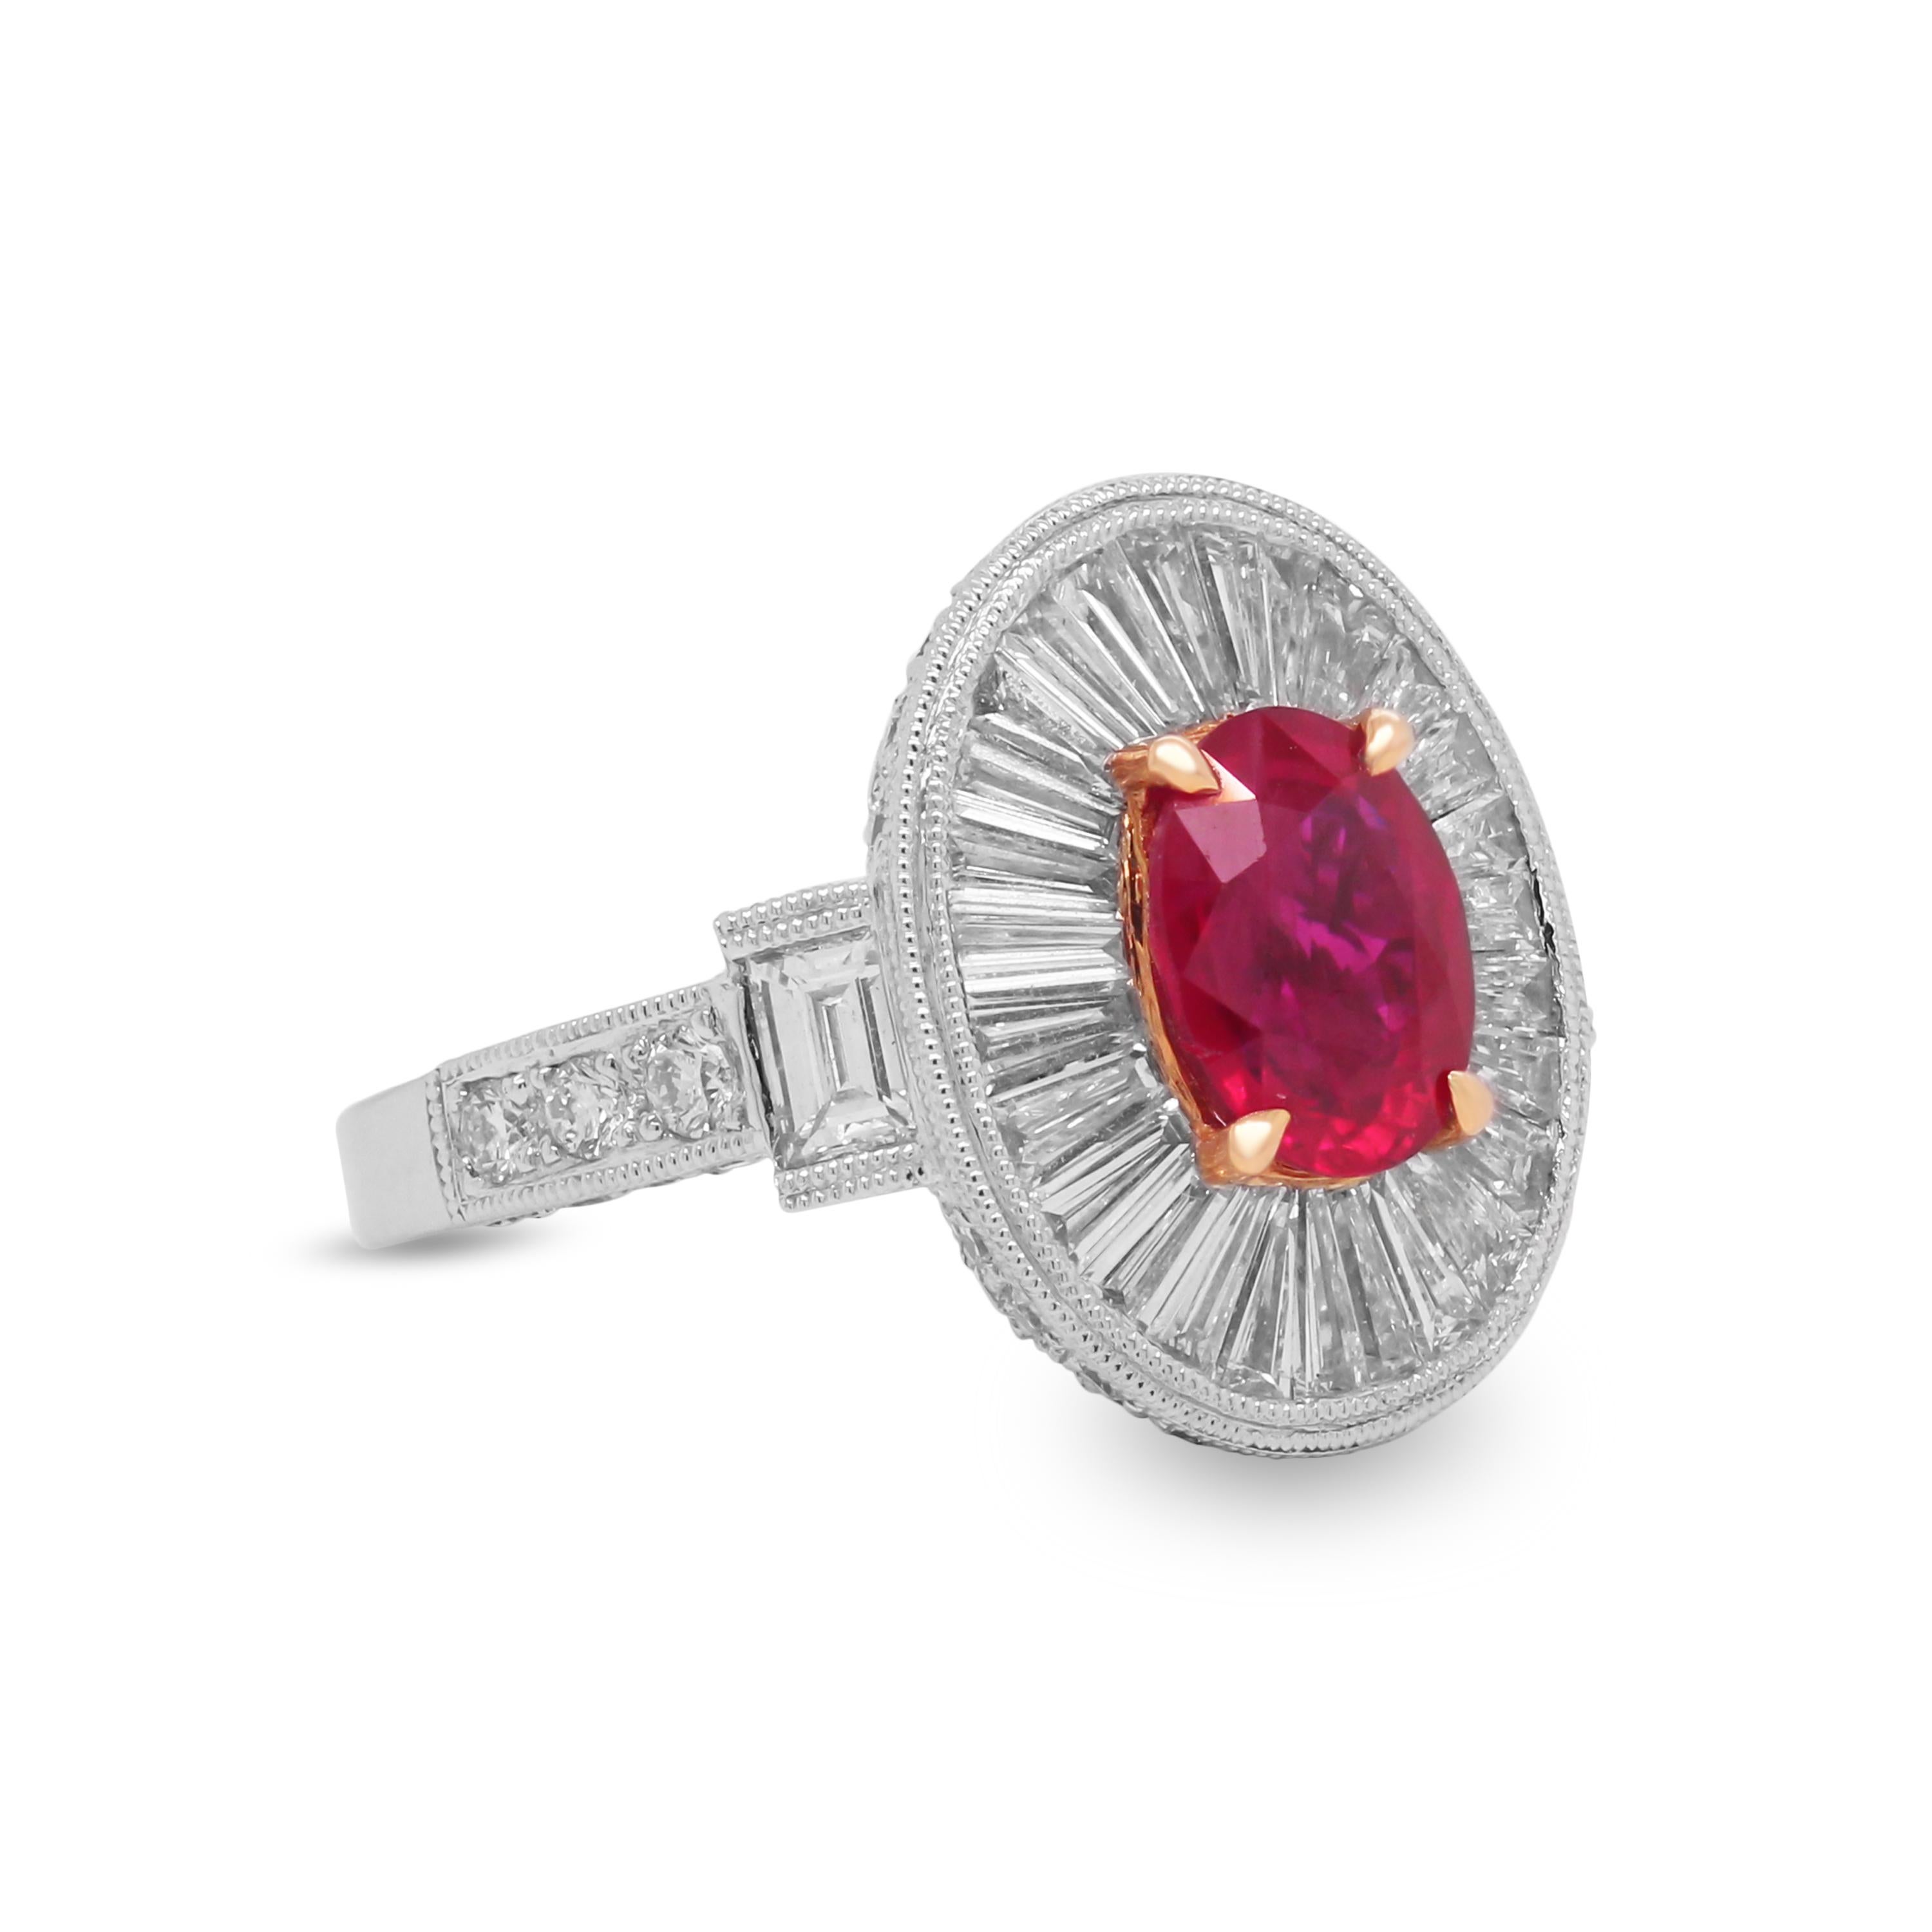 18K White Gold Oval Cocktail Ring with Baguette and Round Diamonds and Oval Cut 1.72 Carat Ruby Center

This handmade ring features an oval cut, Ruby center with tapered baguette diamonds surrounding along with round diamonds.
 
1.72 carat oval cut,